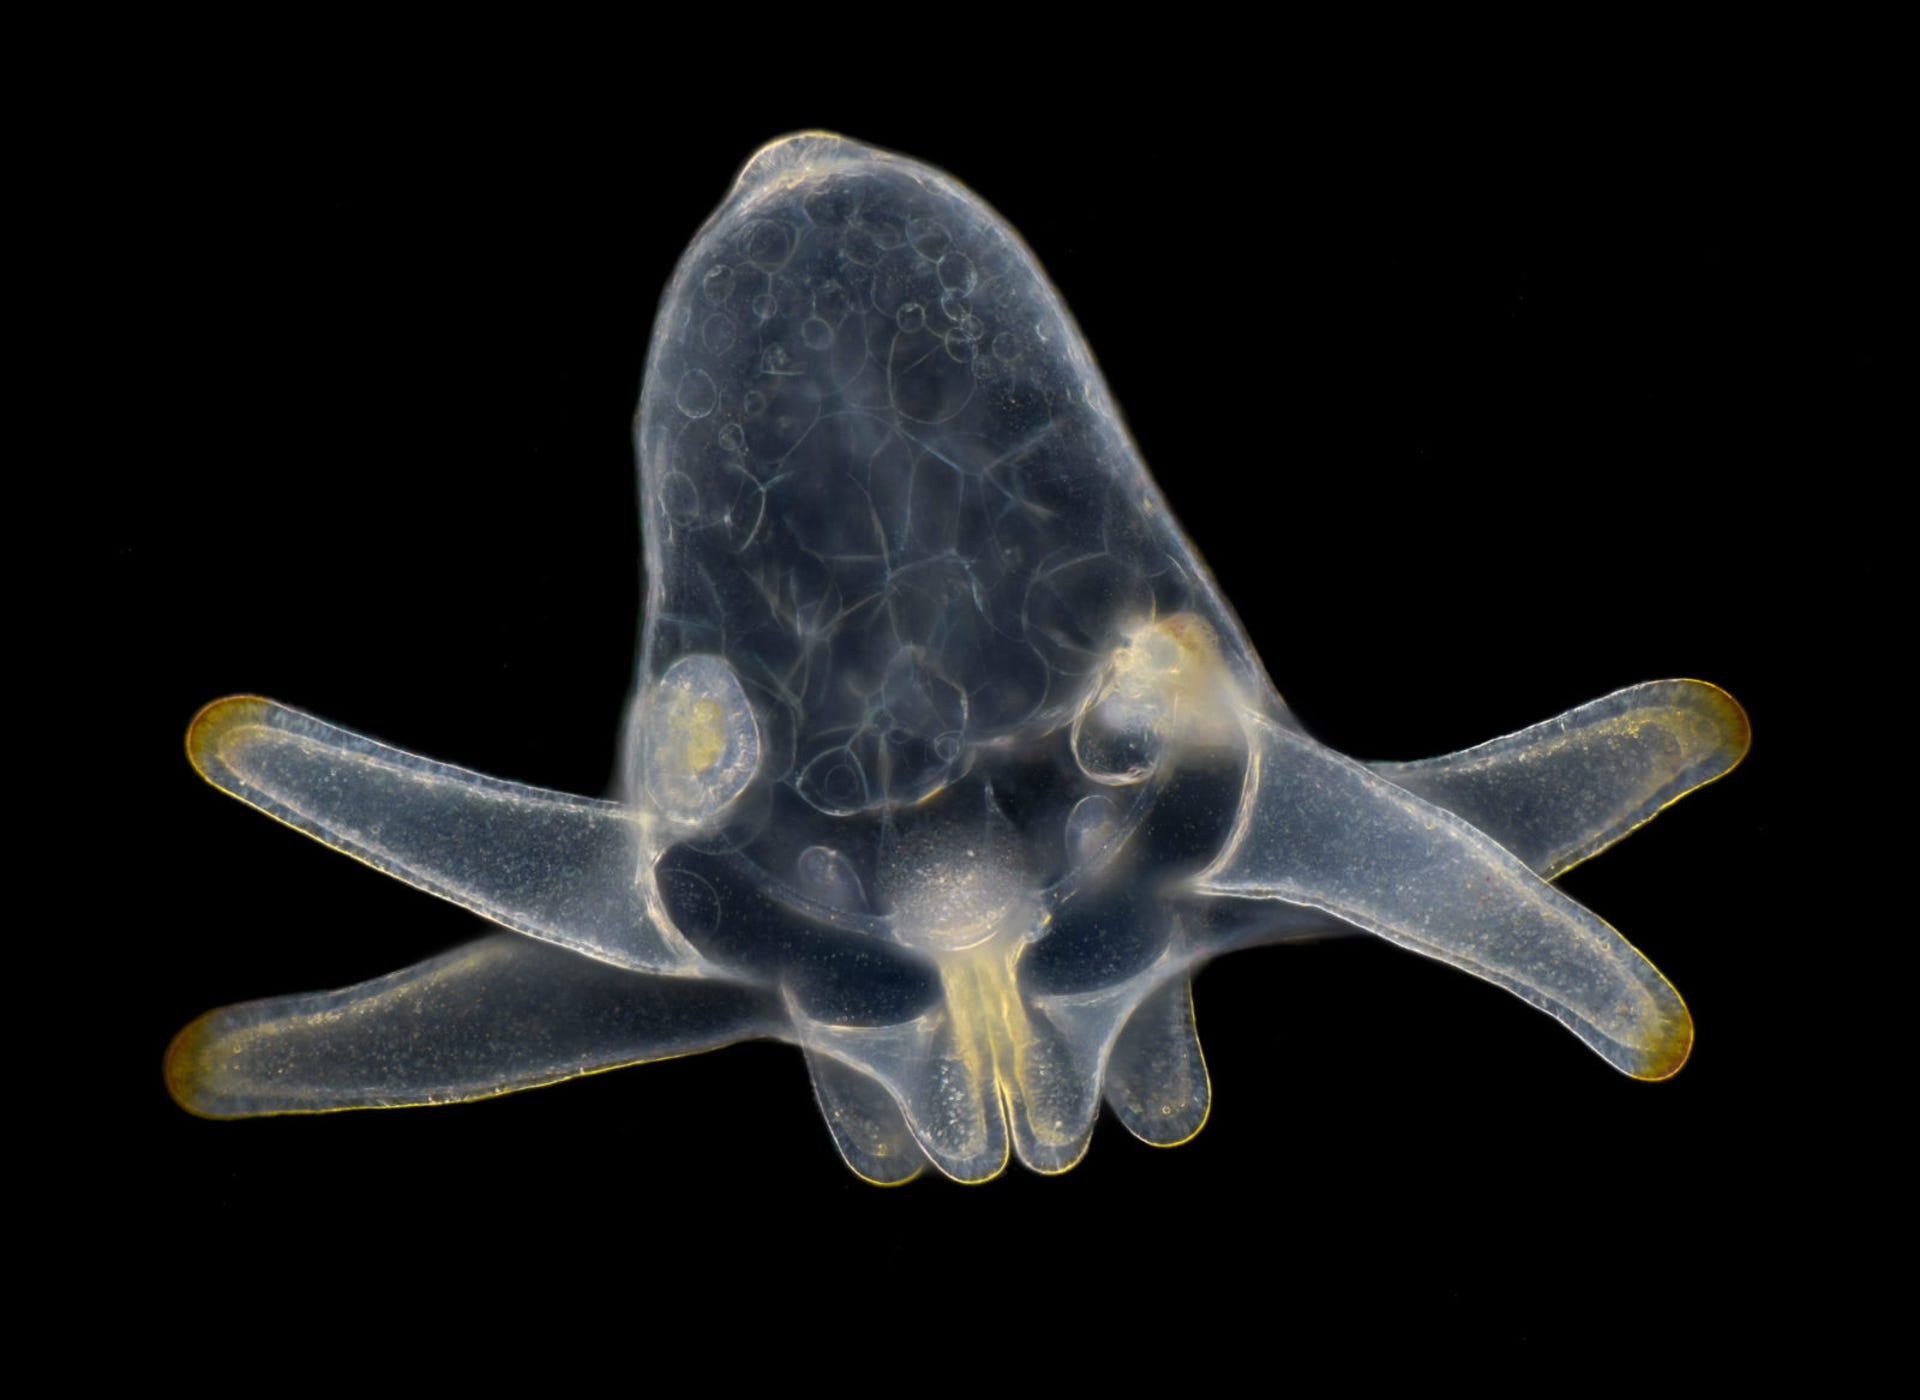 Ghostly, multi-tentacled larva appears see-through against a black background.